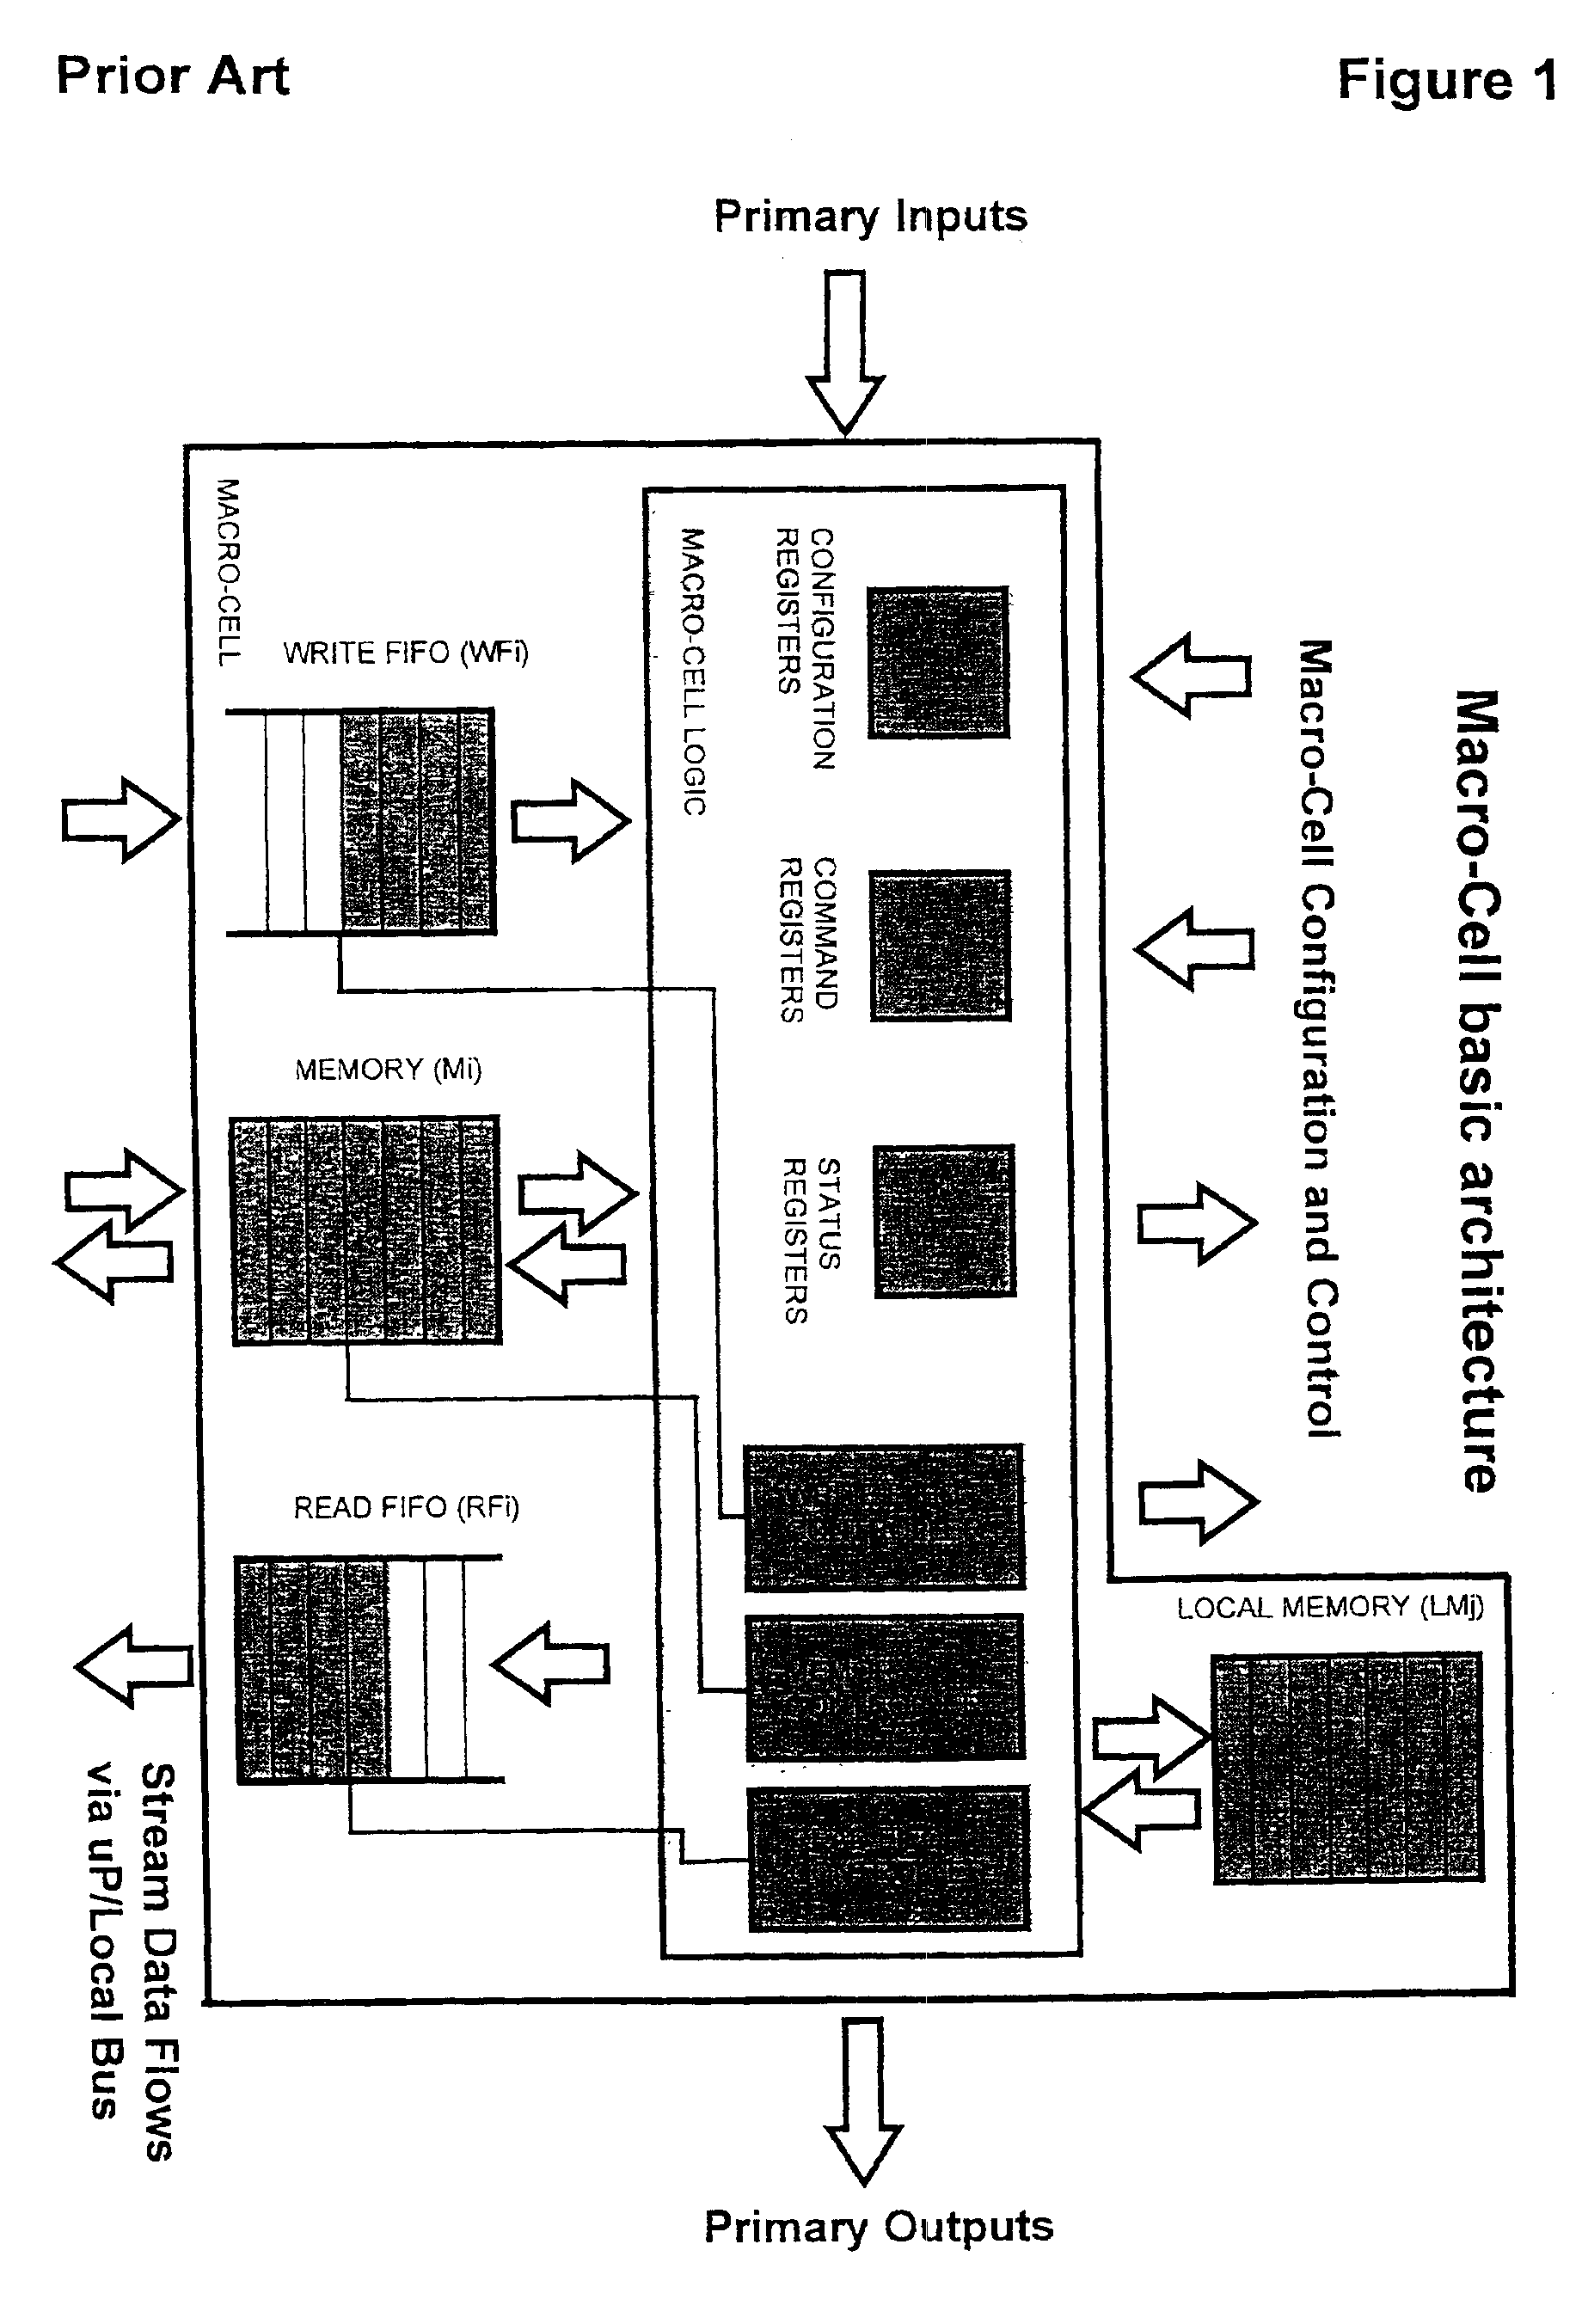 System of distributed microprocessor interfaces toward macro-cell based designs implemented as ASIC or FPGA bread boarding and relative common bus protocol